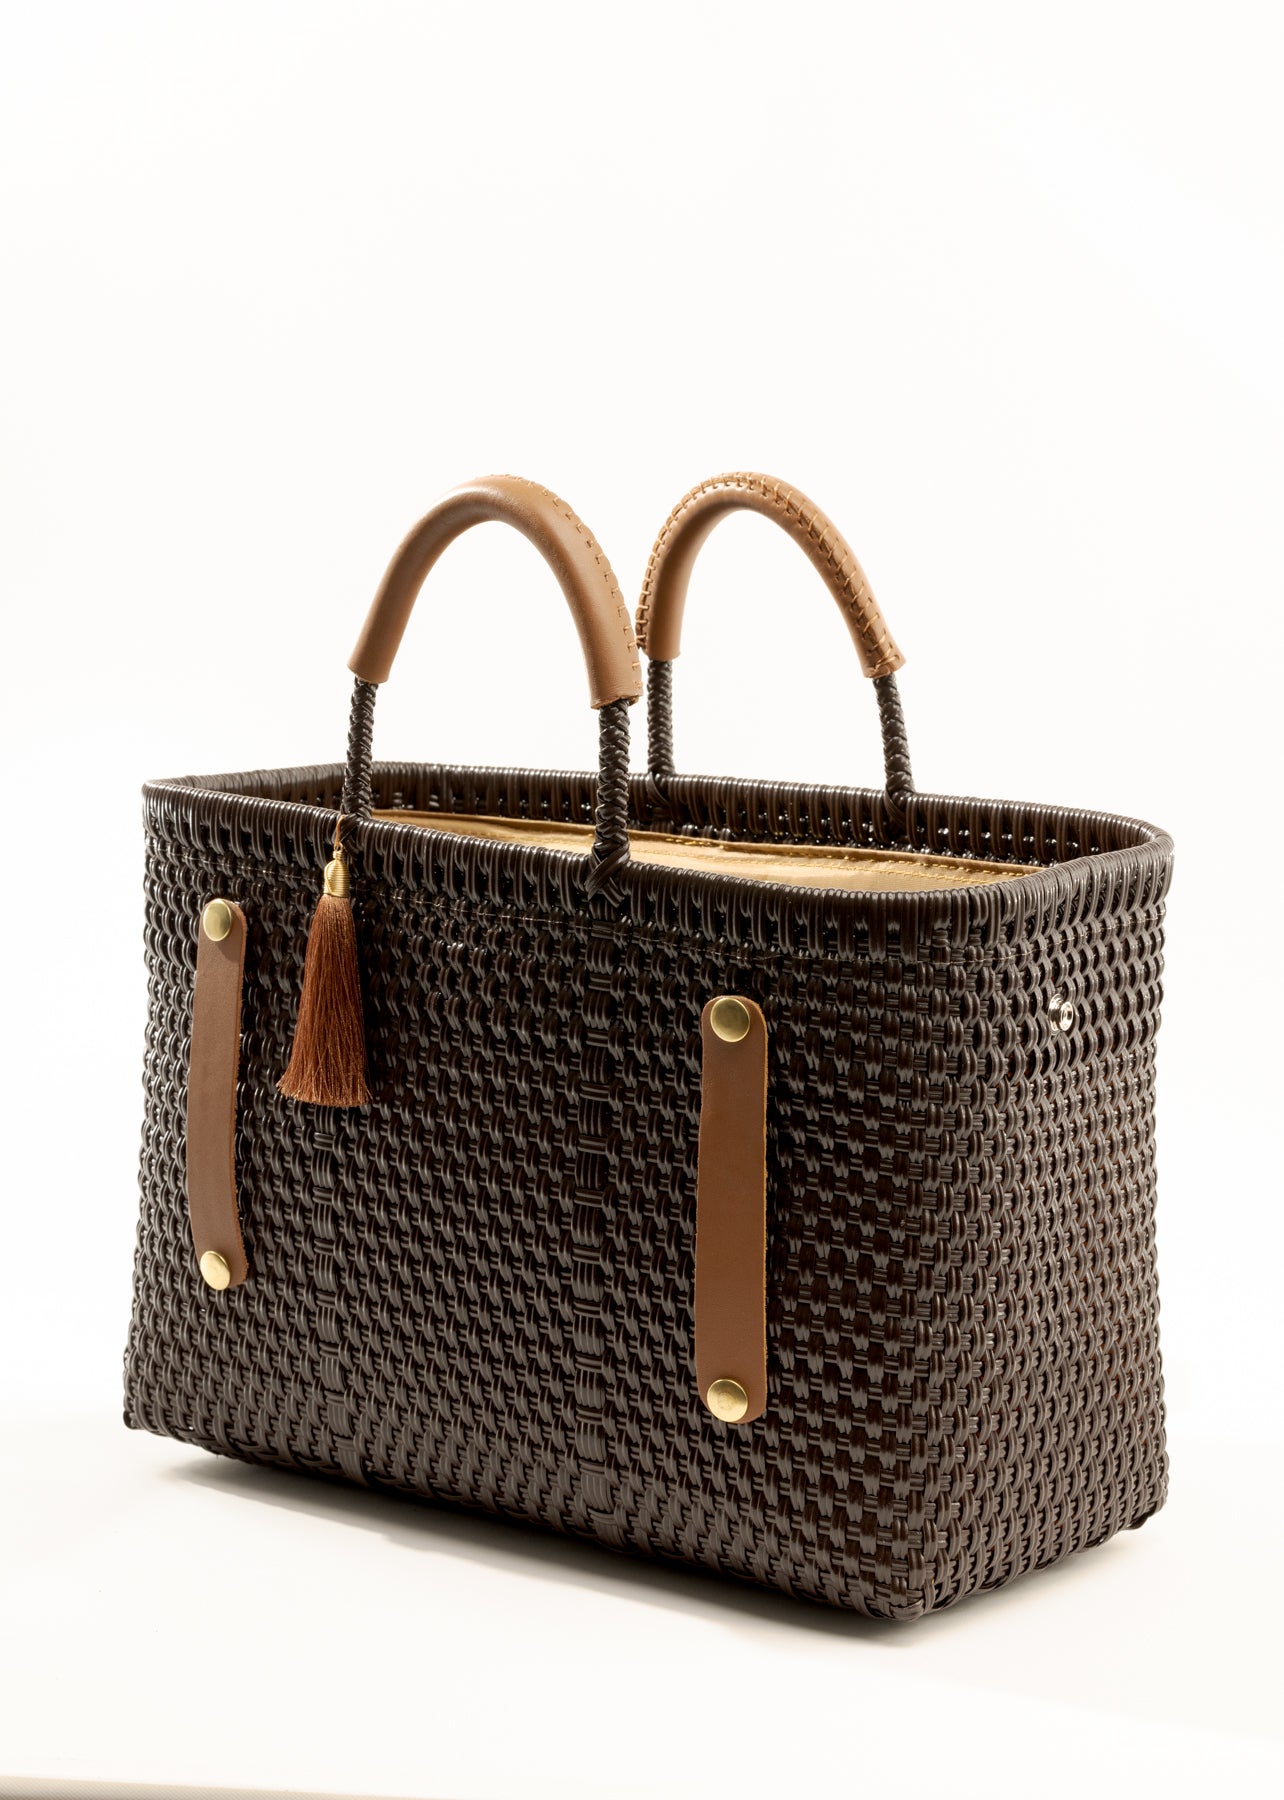 Side angle of brown woven recycled bucket handbag with brown leather handles and closure straps and a brown tassel